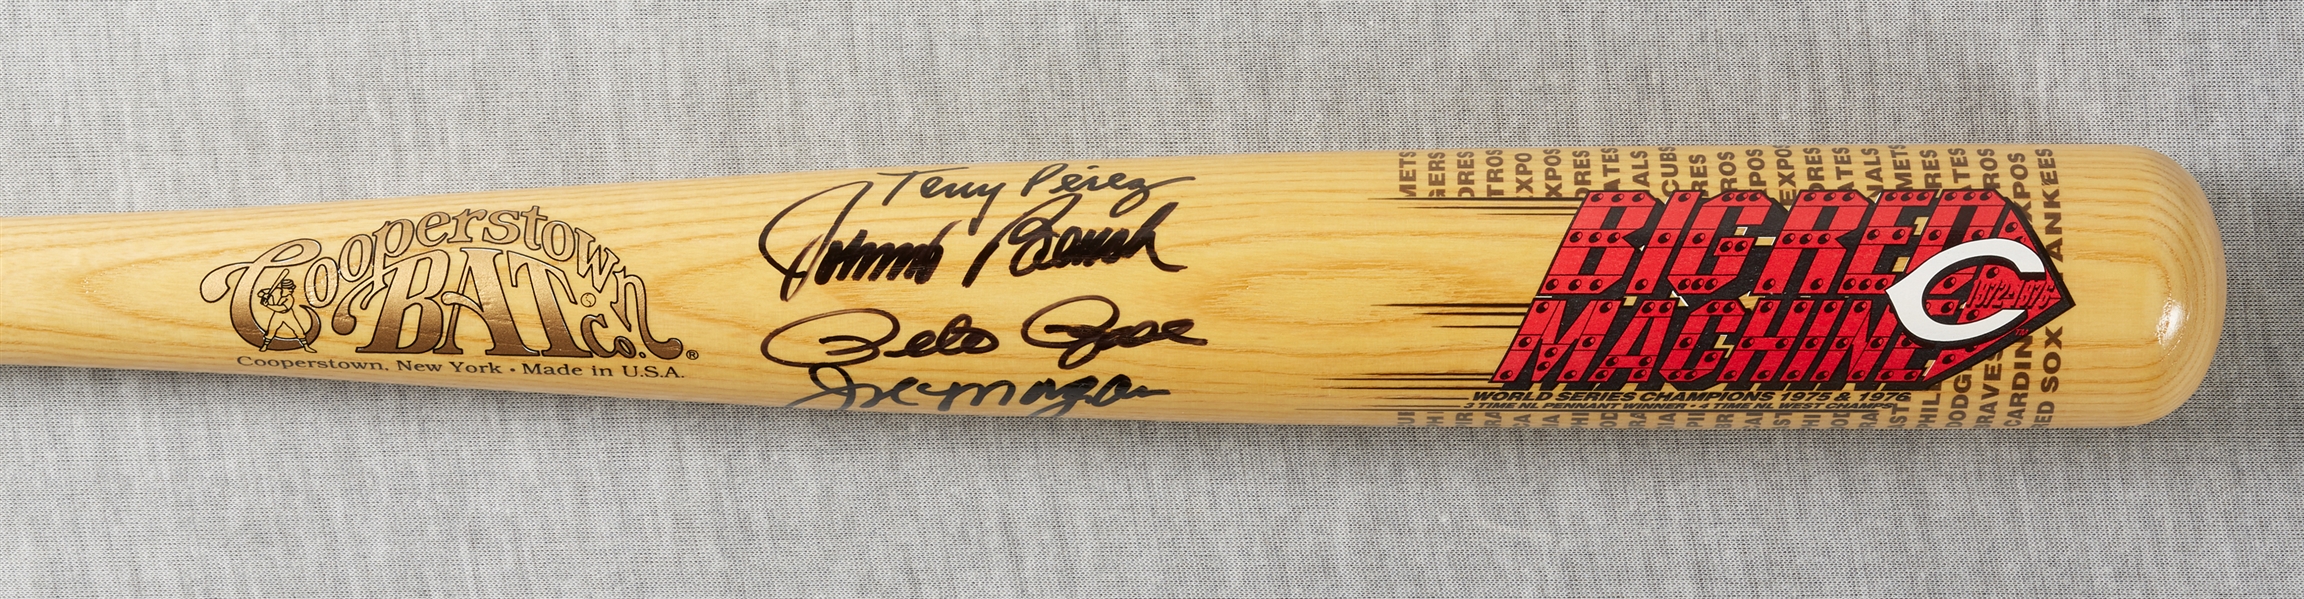 Big Red Machine Signed Cooperstown Bat with Bench, Perez, Morgan, Rose (4) (BAS)